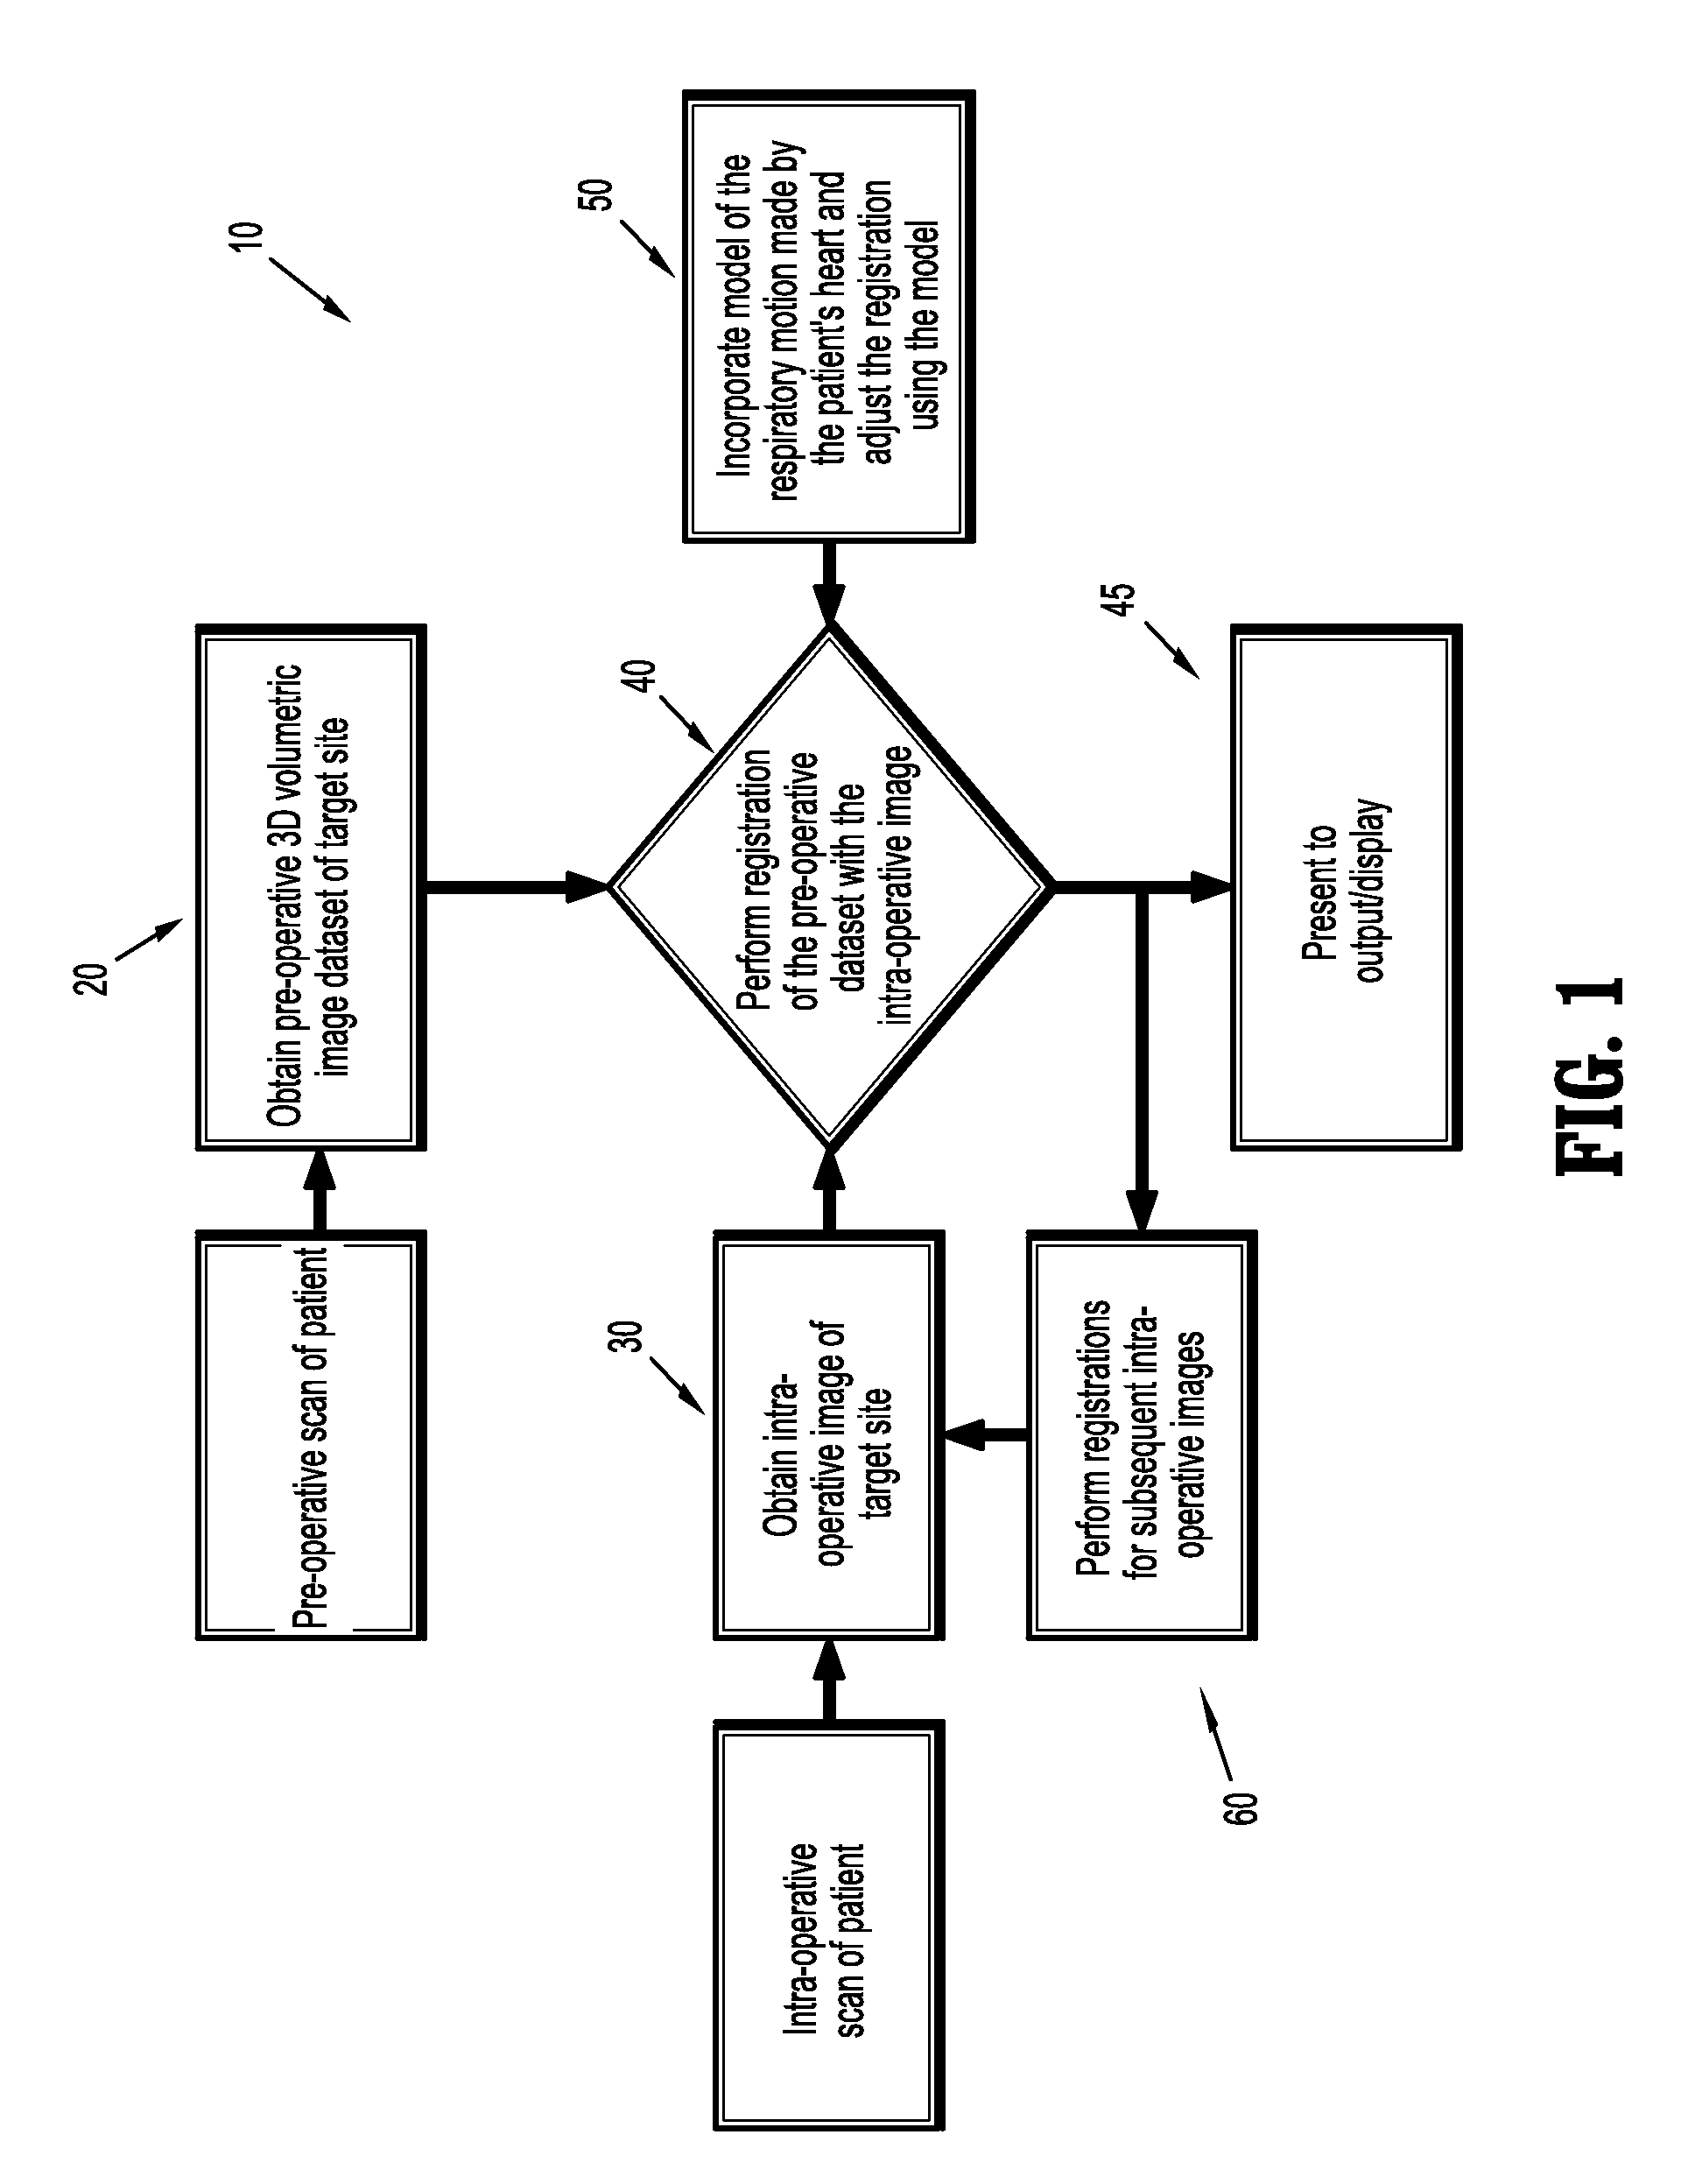 Method of compensation of respiratory motion in cardiac imaging